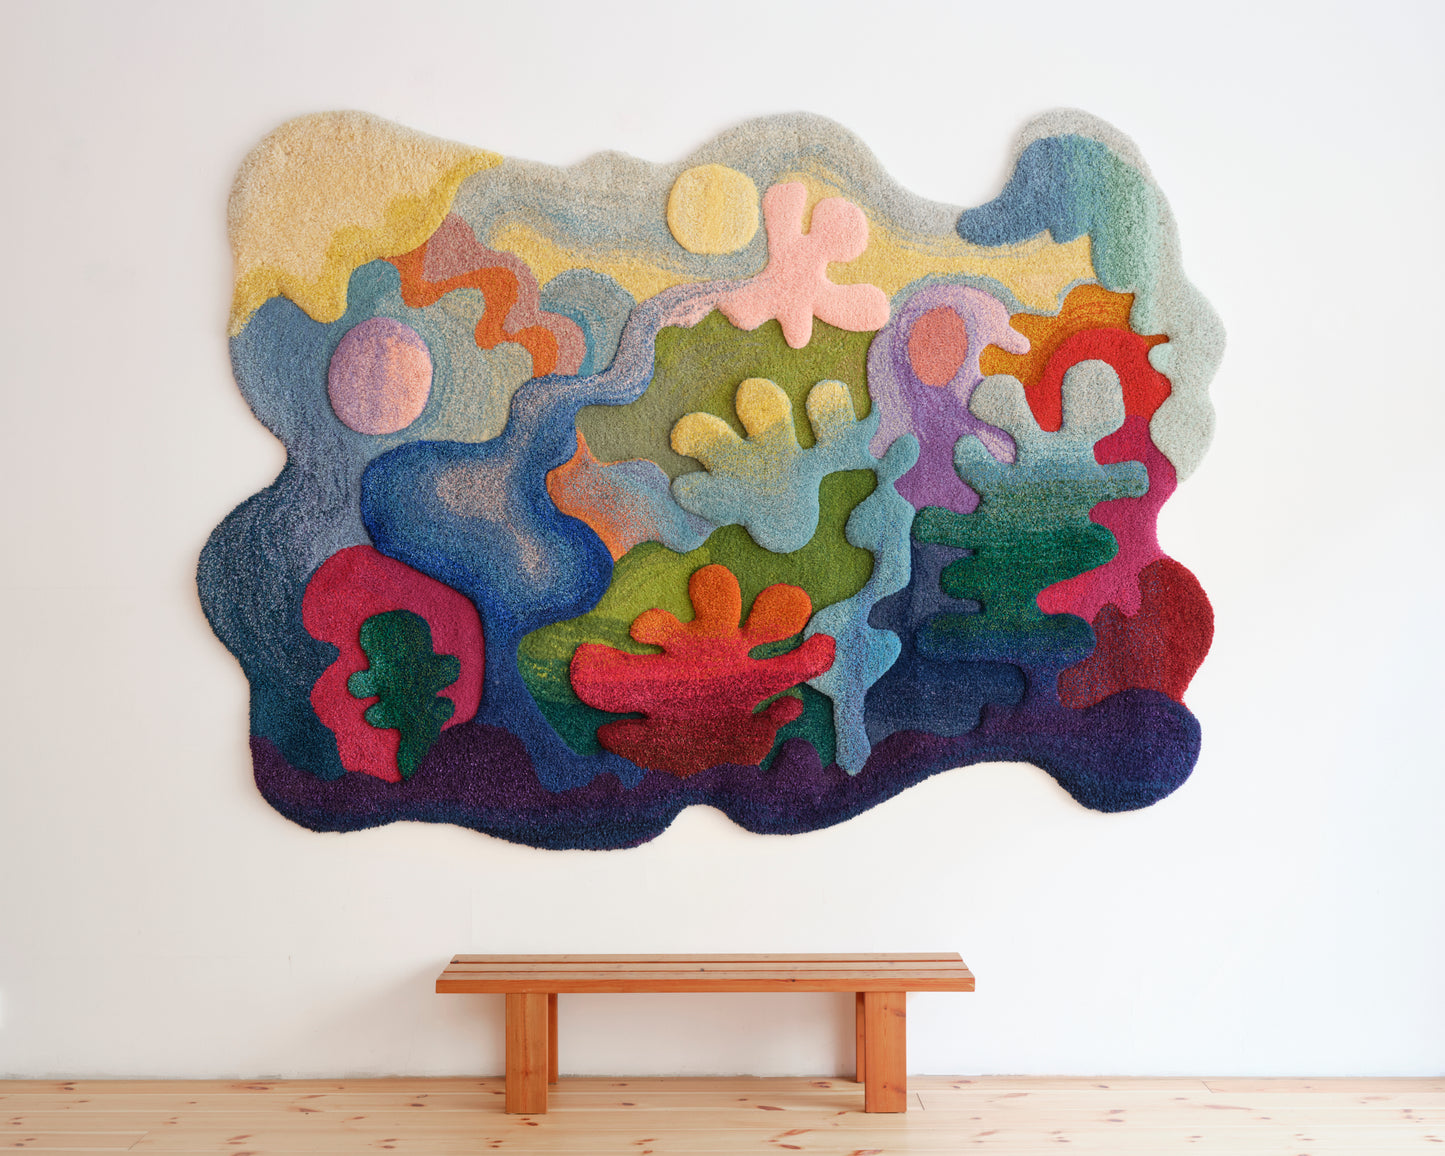 Wall hanging "Below the Surface" by Camilla Iliefski